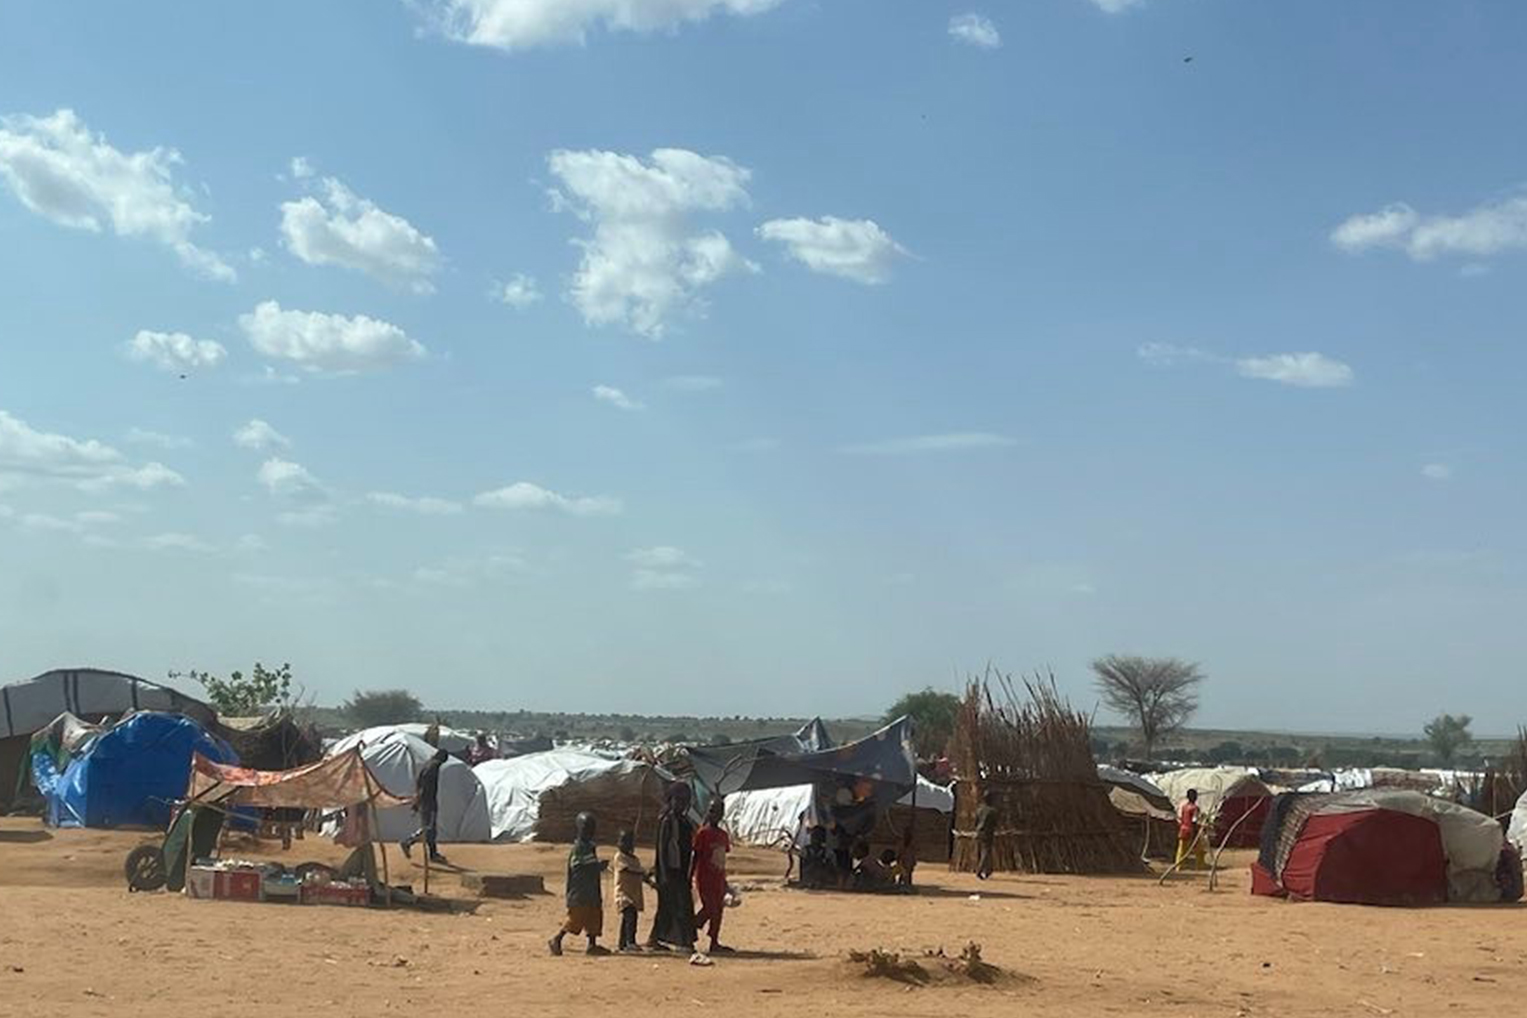 Children are among the most vulnerable people in the ongoing crisis driving Sudanese families over the border into Chad.